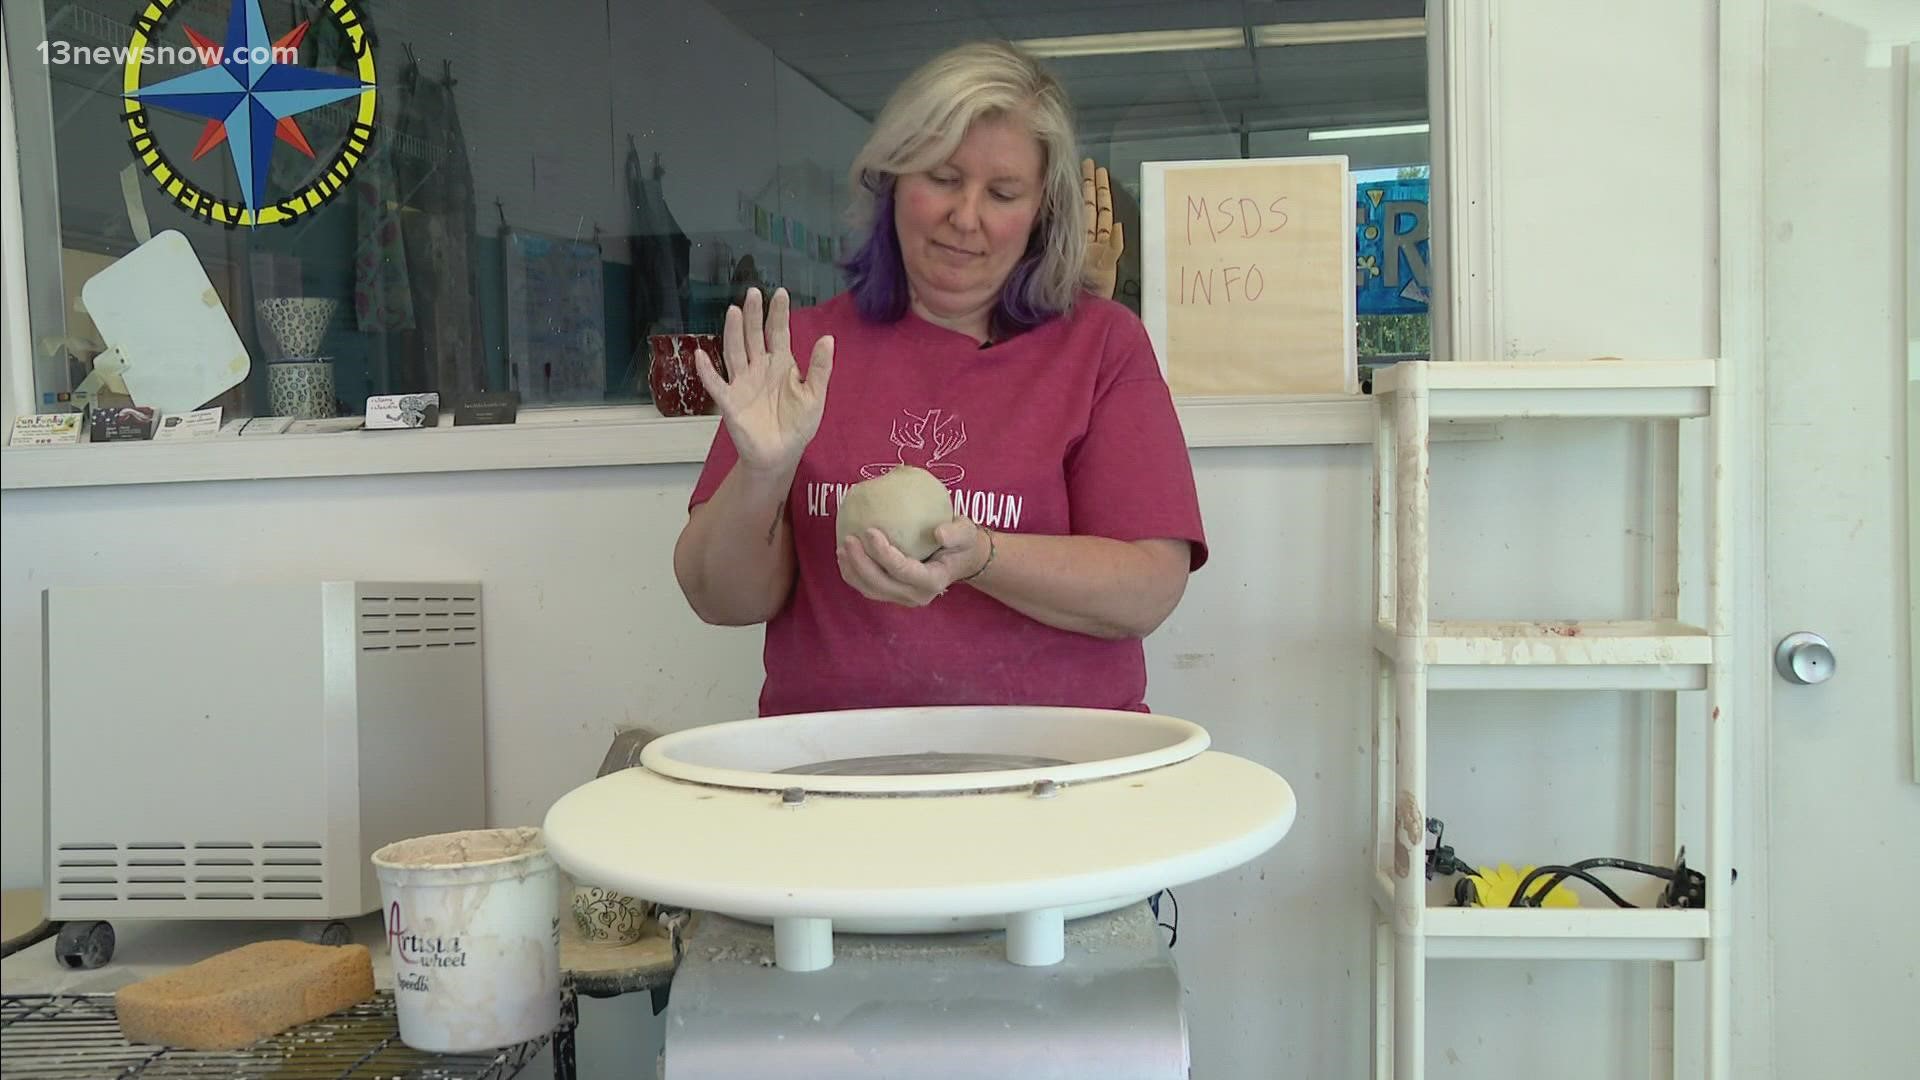 Take a look inside a local pottery studio, opened by a Navy veteran.